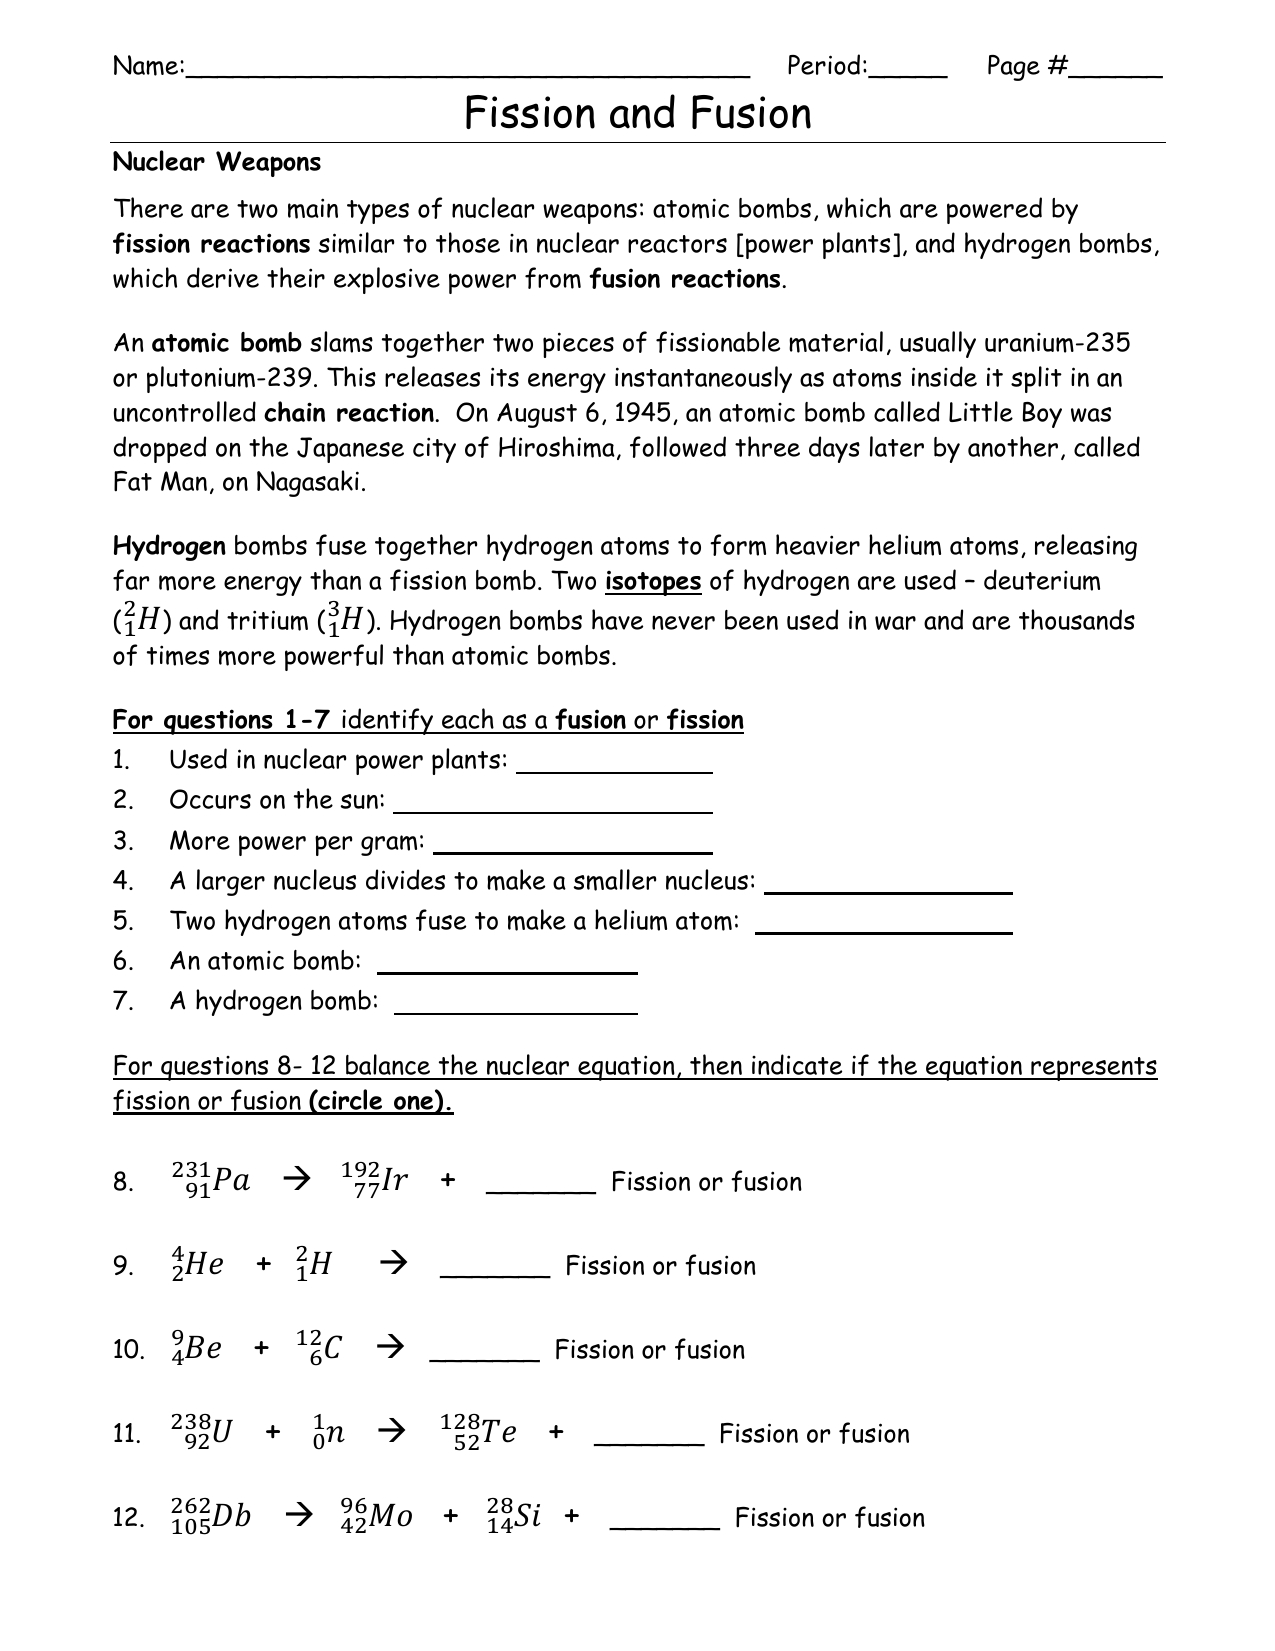 fission-versus-fusion-worksheet-answers-db-excel